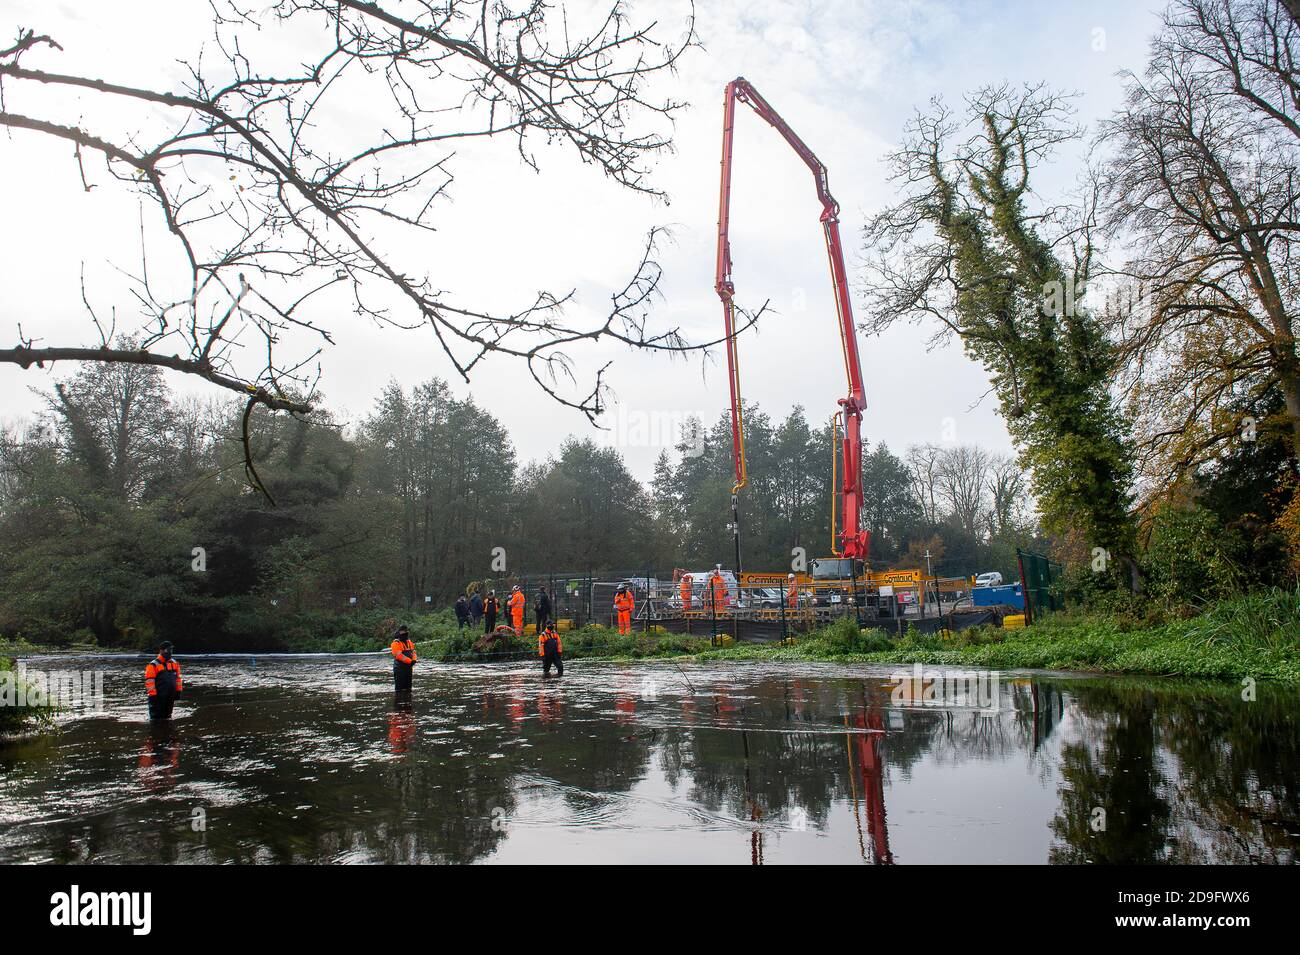 Denham, Buckinghamshire, UK. 5th November, 2020. Despite England now being in a Covid-19 national lockdown for the second time, HS2 are being allowed to continue with their construction work for the new High Speed rail from London to Birmingham. Concrete was being pumped into the foundations for a new HS2 bridge across the chalk stream River Colne in Denham Country Park today. Credit: Maureen McLean/Alamy Live News Stock Photo